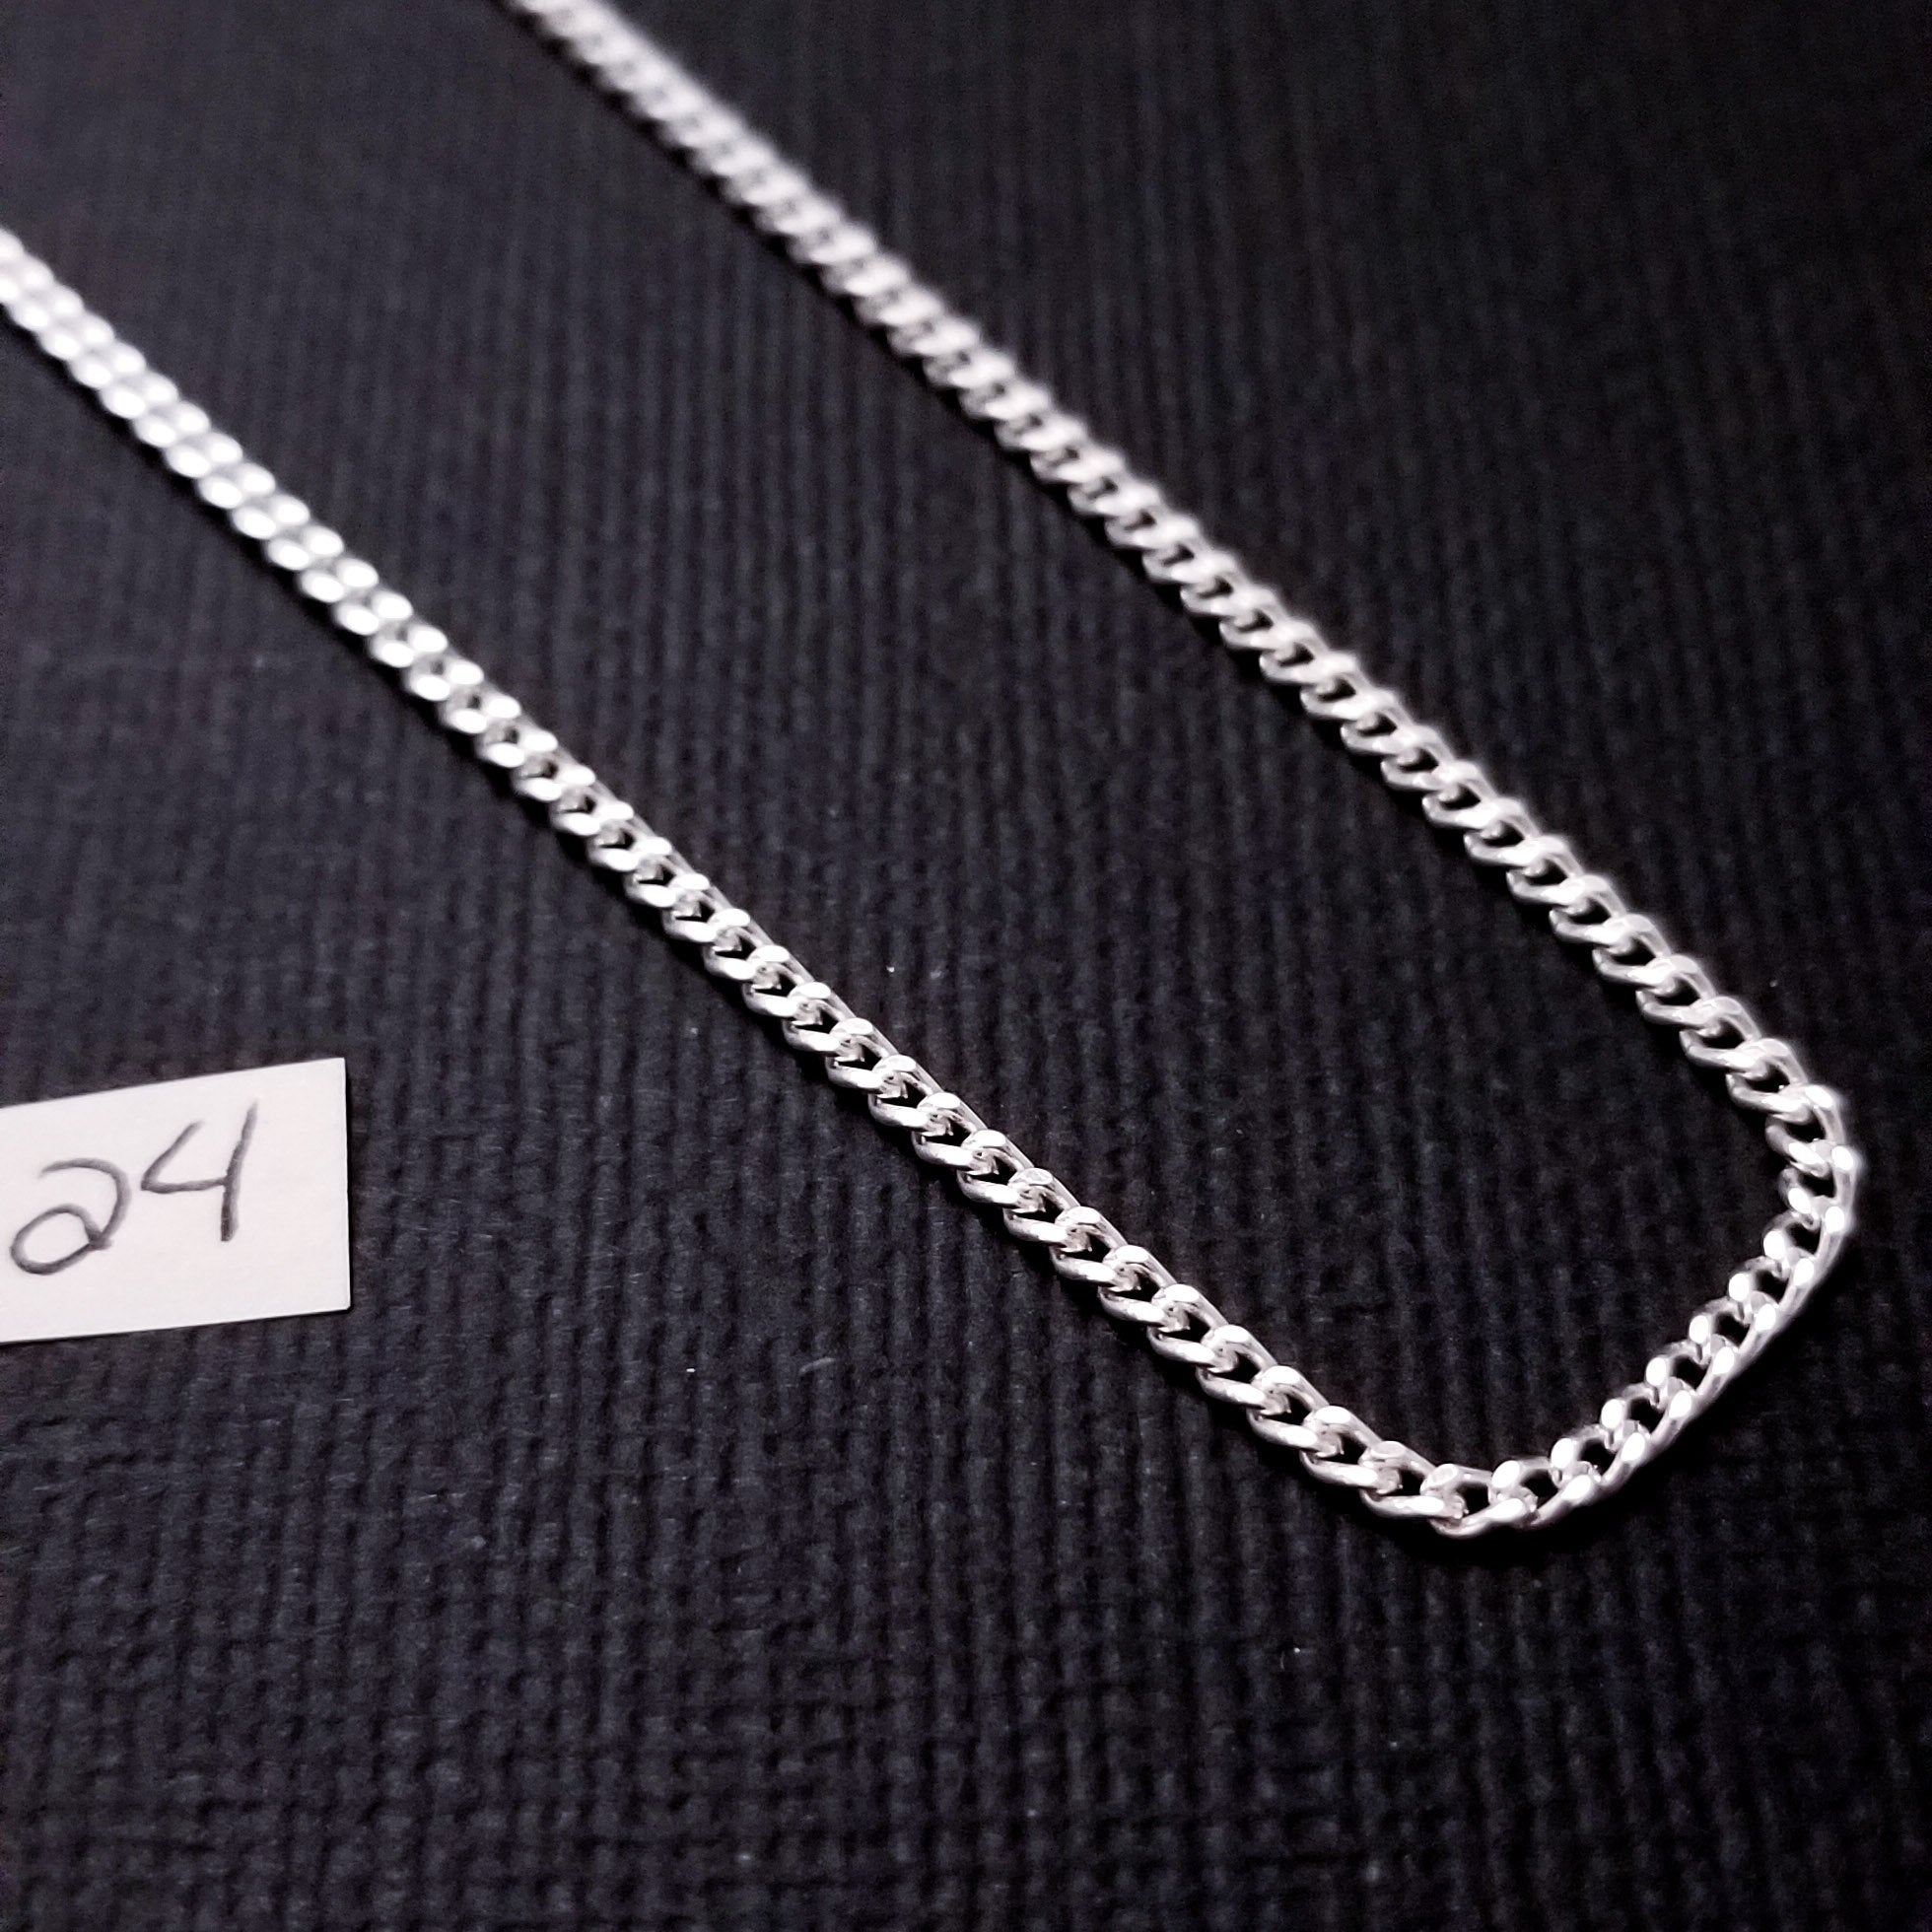 Real Solid 925 Sterling Silver 11mm Thick Men's Rope Chain Necklace Heavy  Kilo | eBay